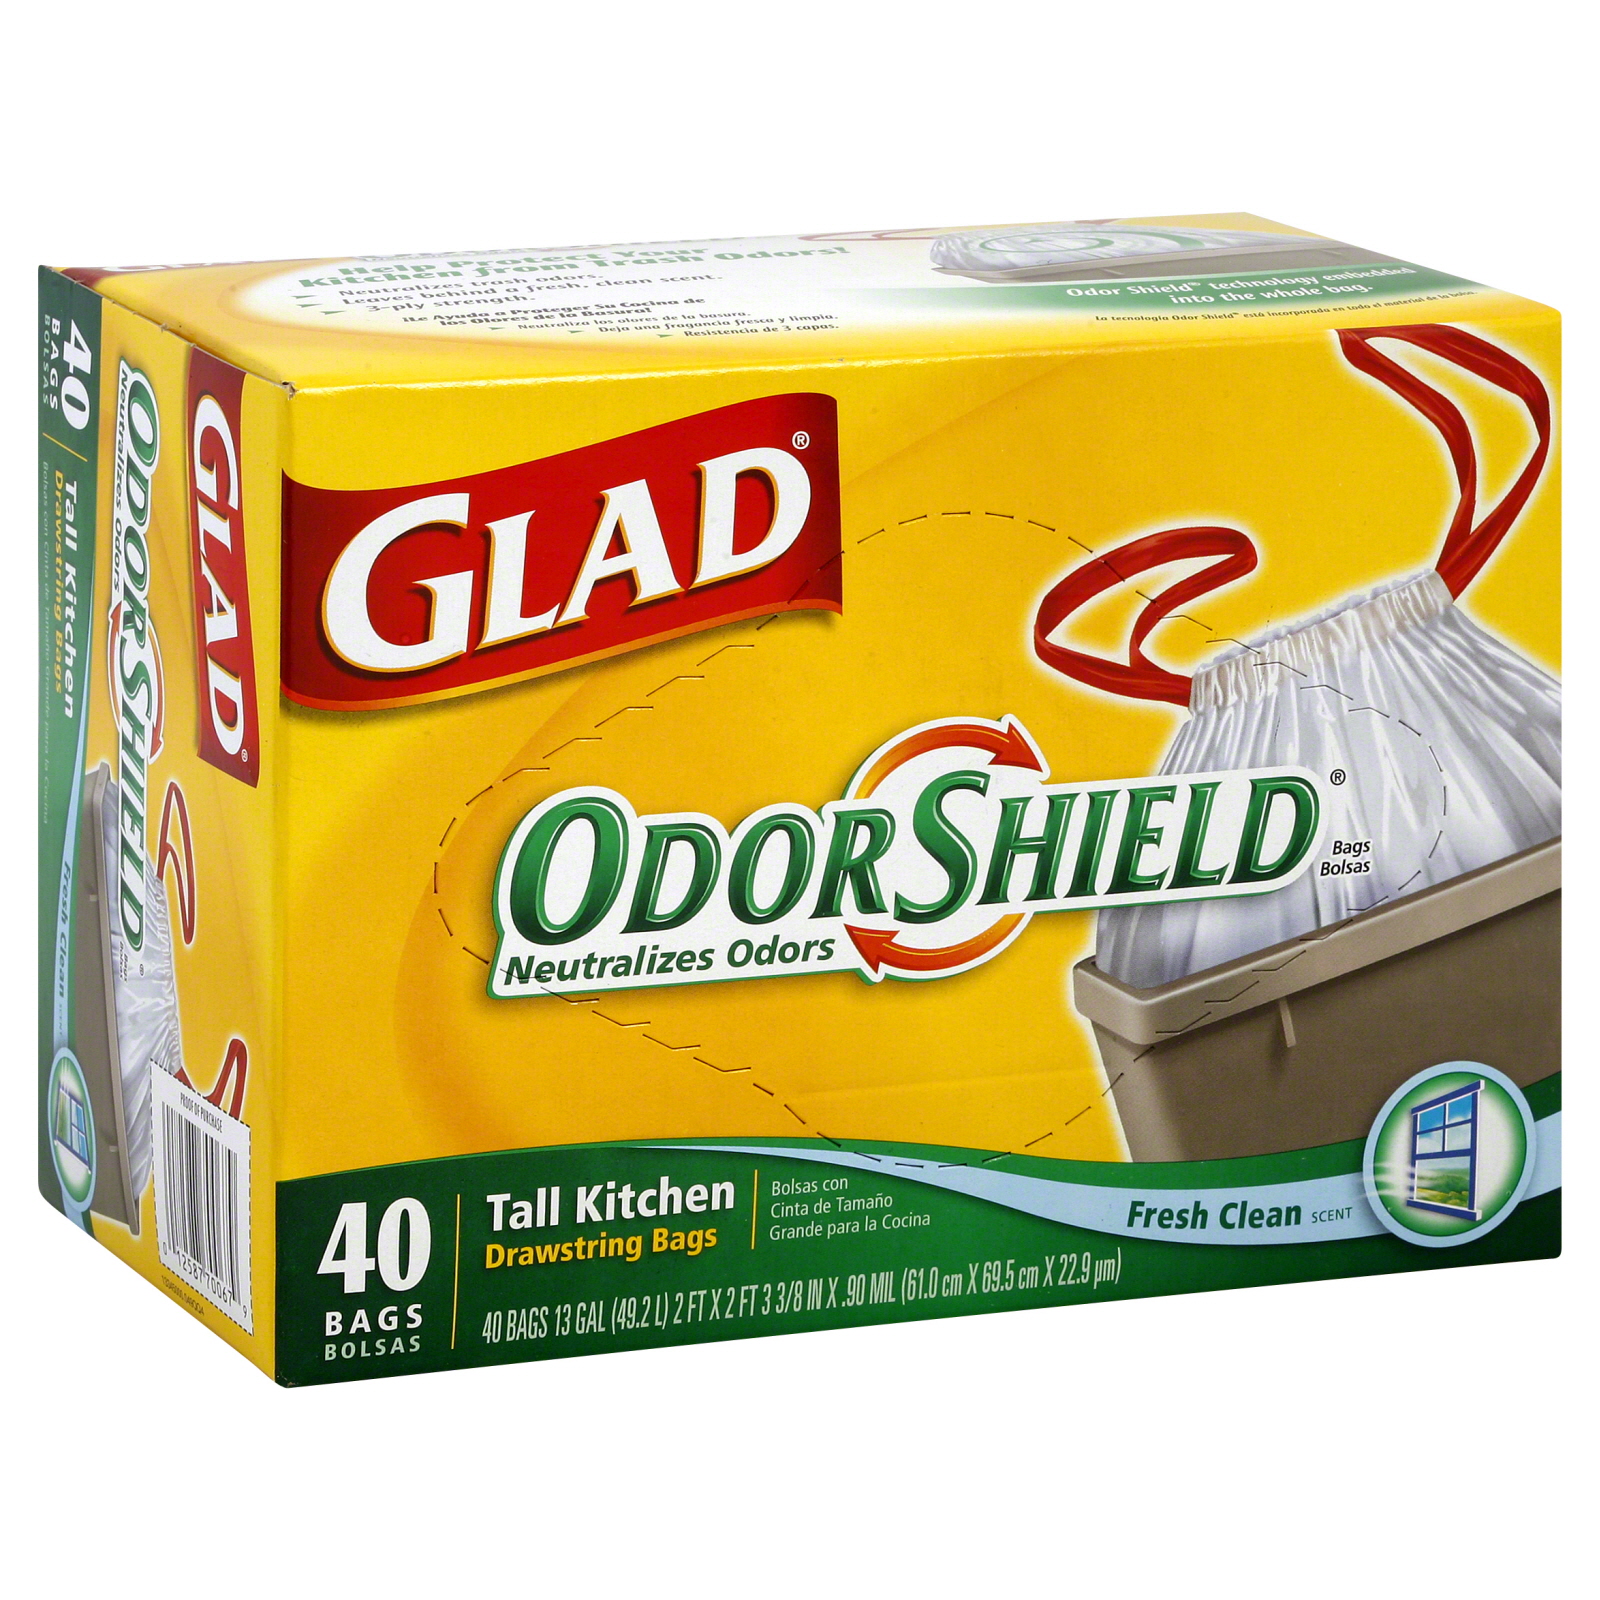 Glad Odor Shield Tall Kitchen Bags, Drawstring, Fresh Clean Scent, 13 Gallon, 40 bags